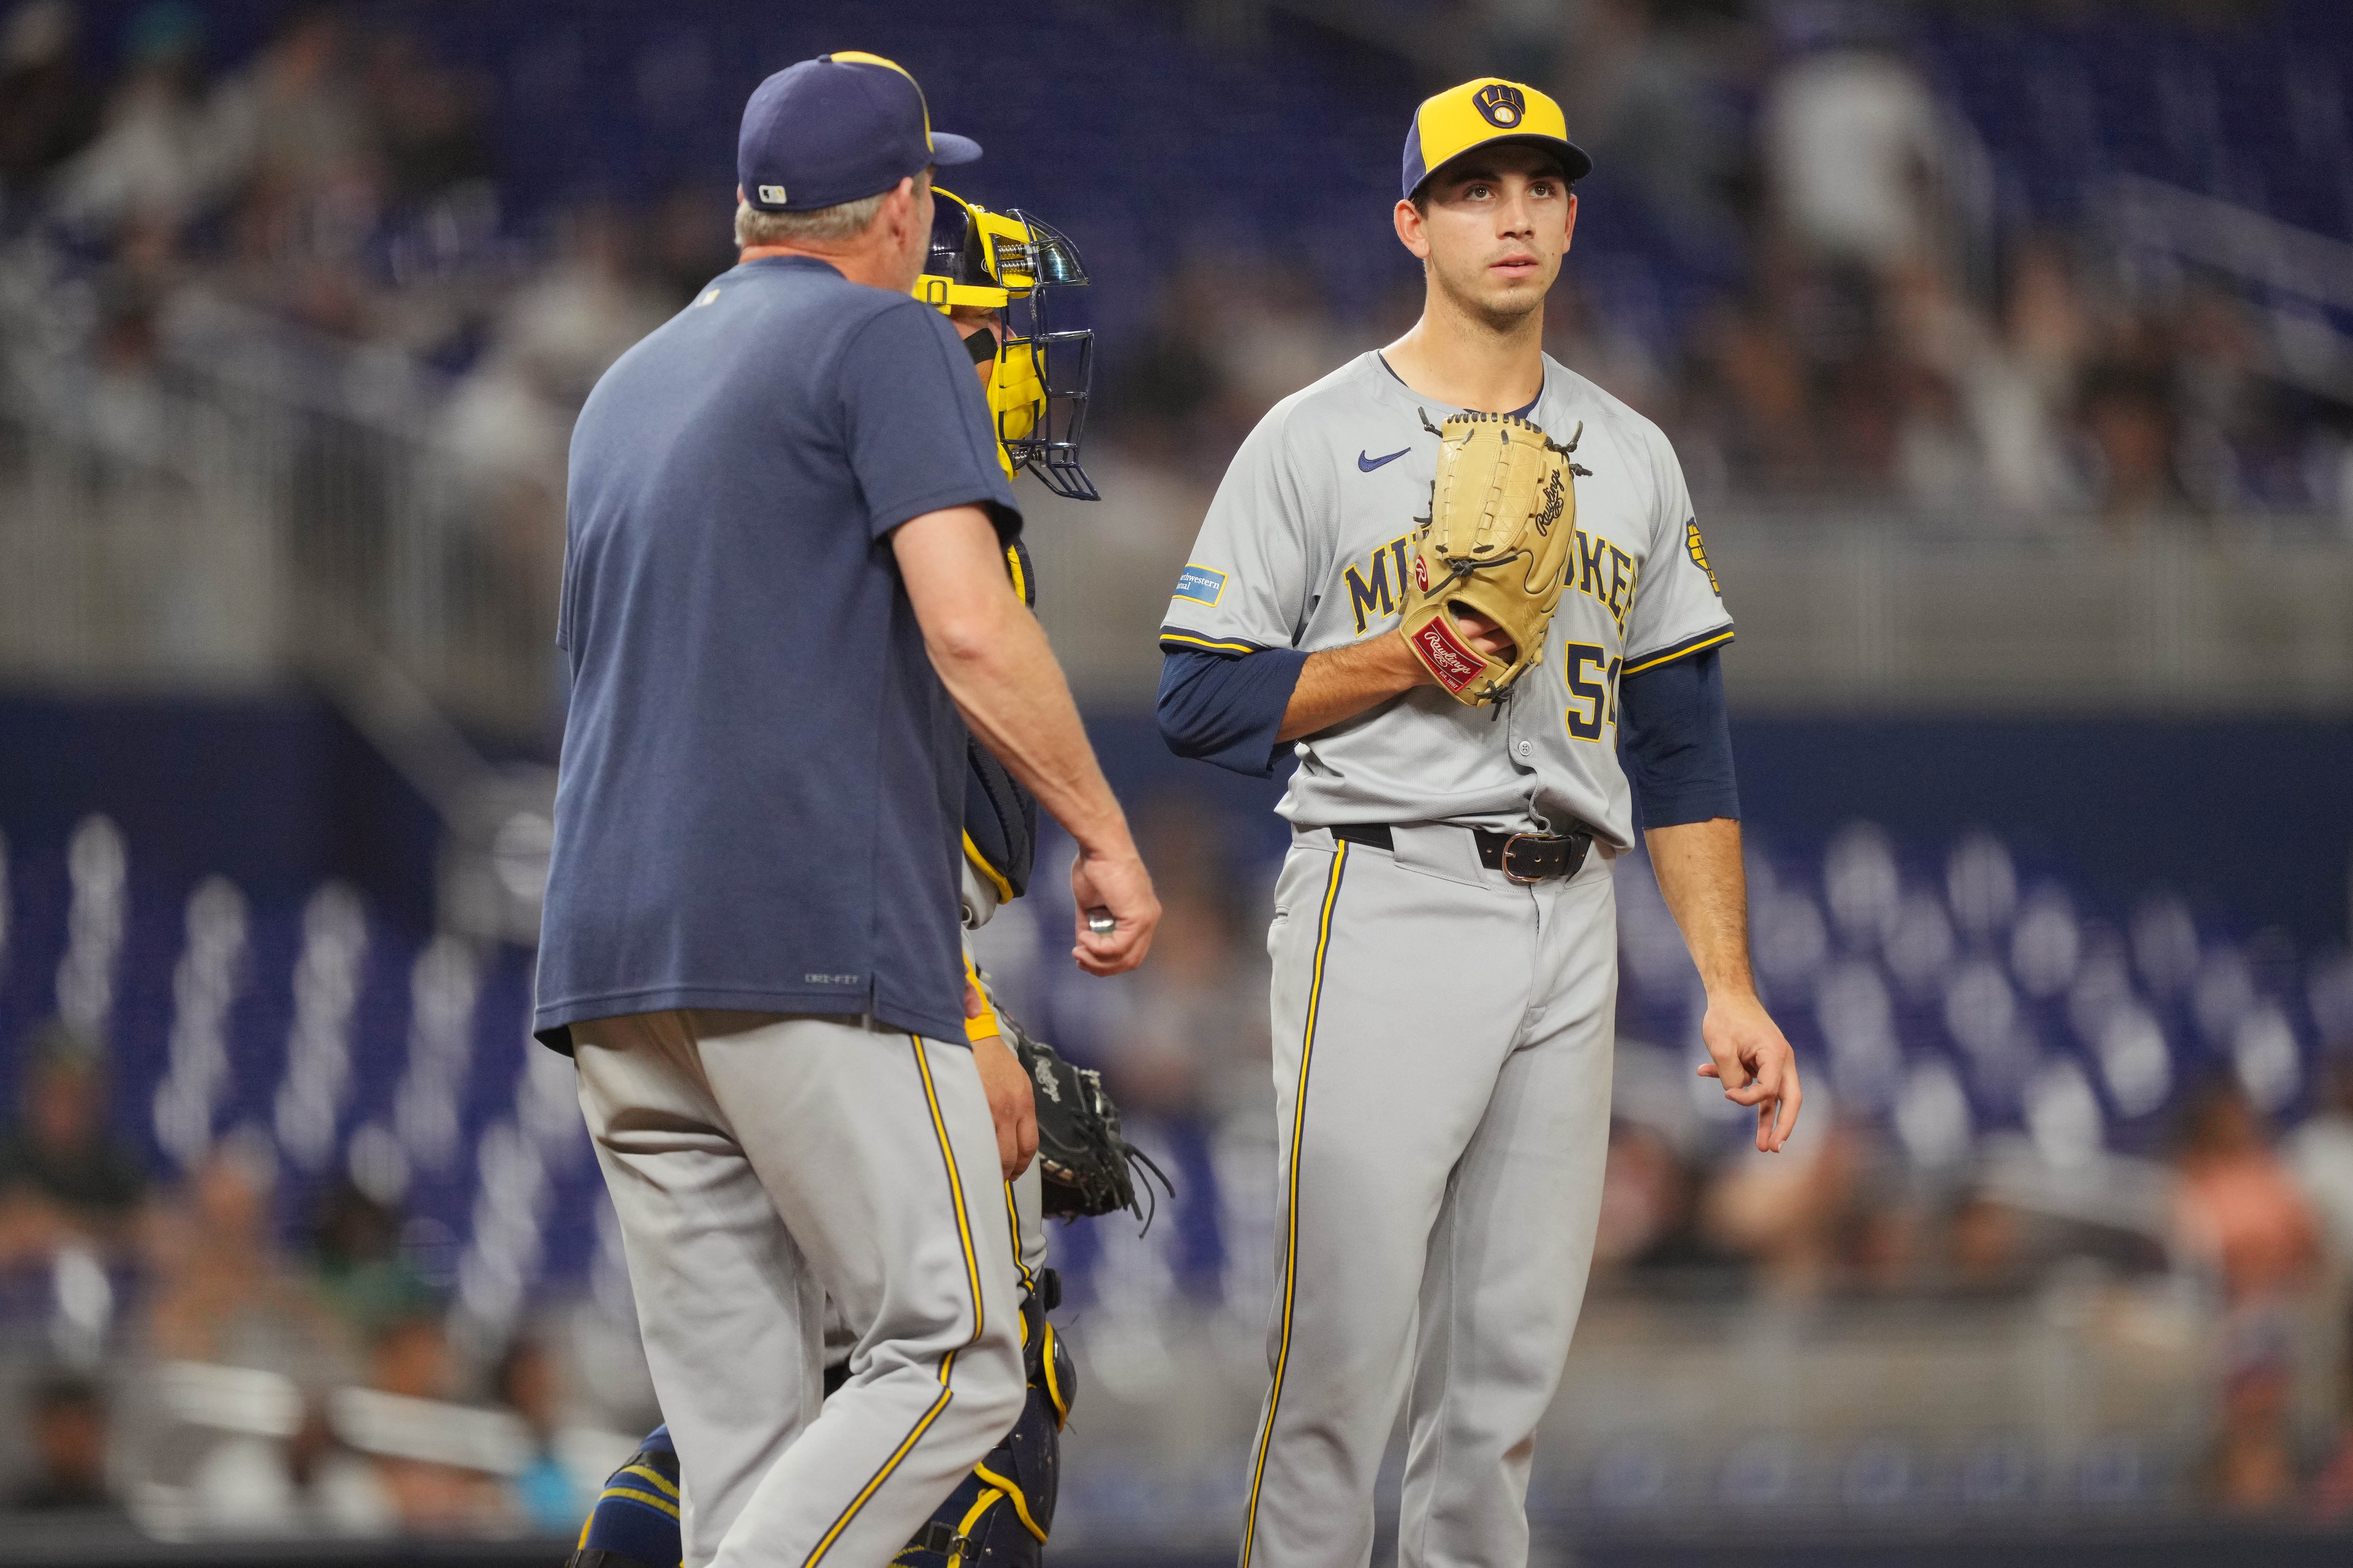 Rookie Robert Gasser comes through in the clutch with a six-inning start for the Brewers